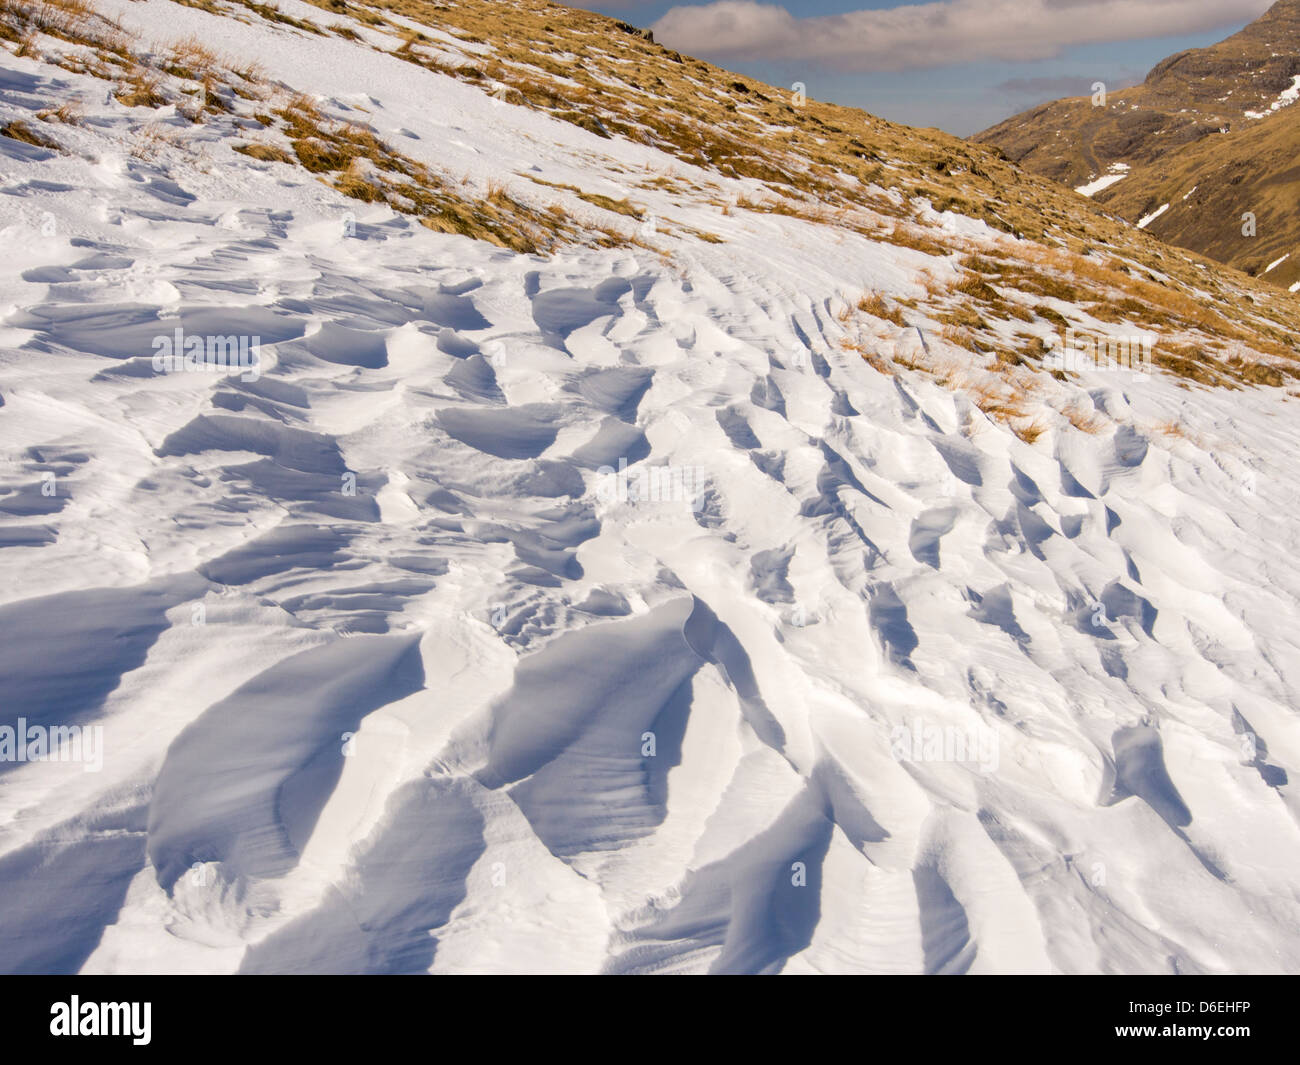 Sastrui caused by wind scour on snow, above Wrynose Pass in the Lake District, UK. Stock Photo